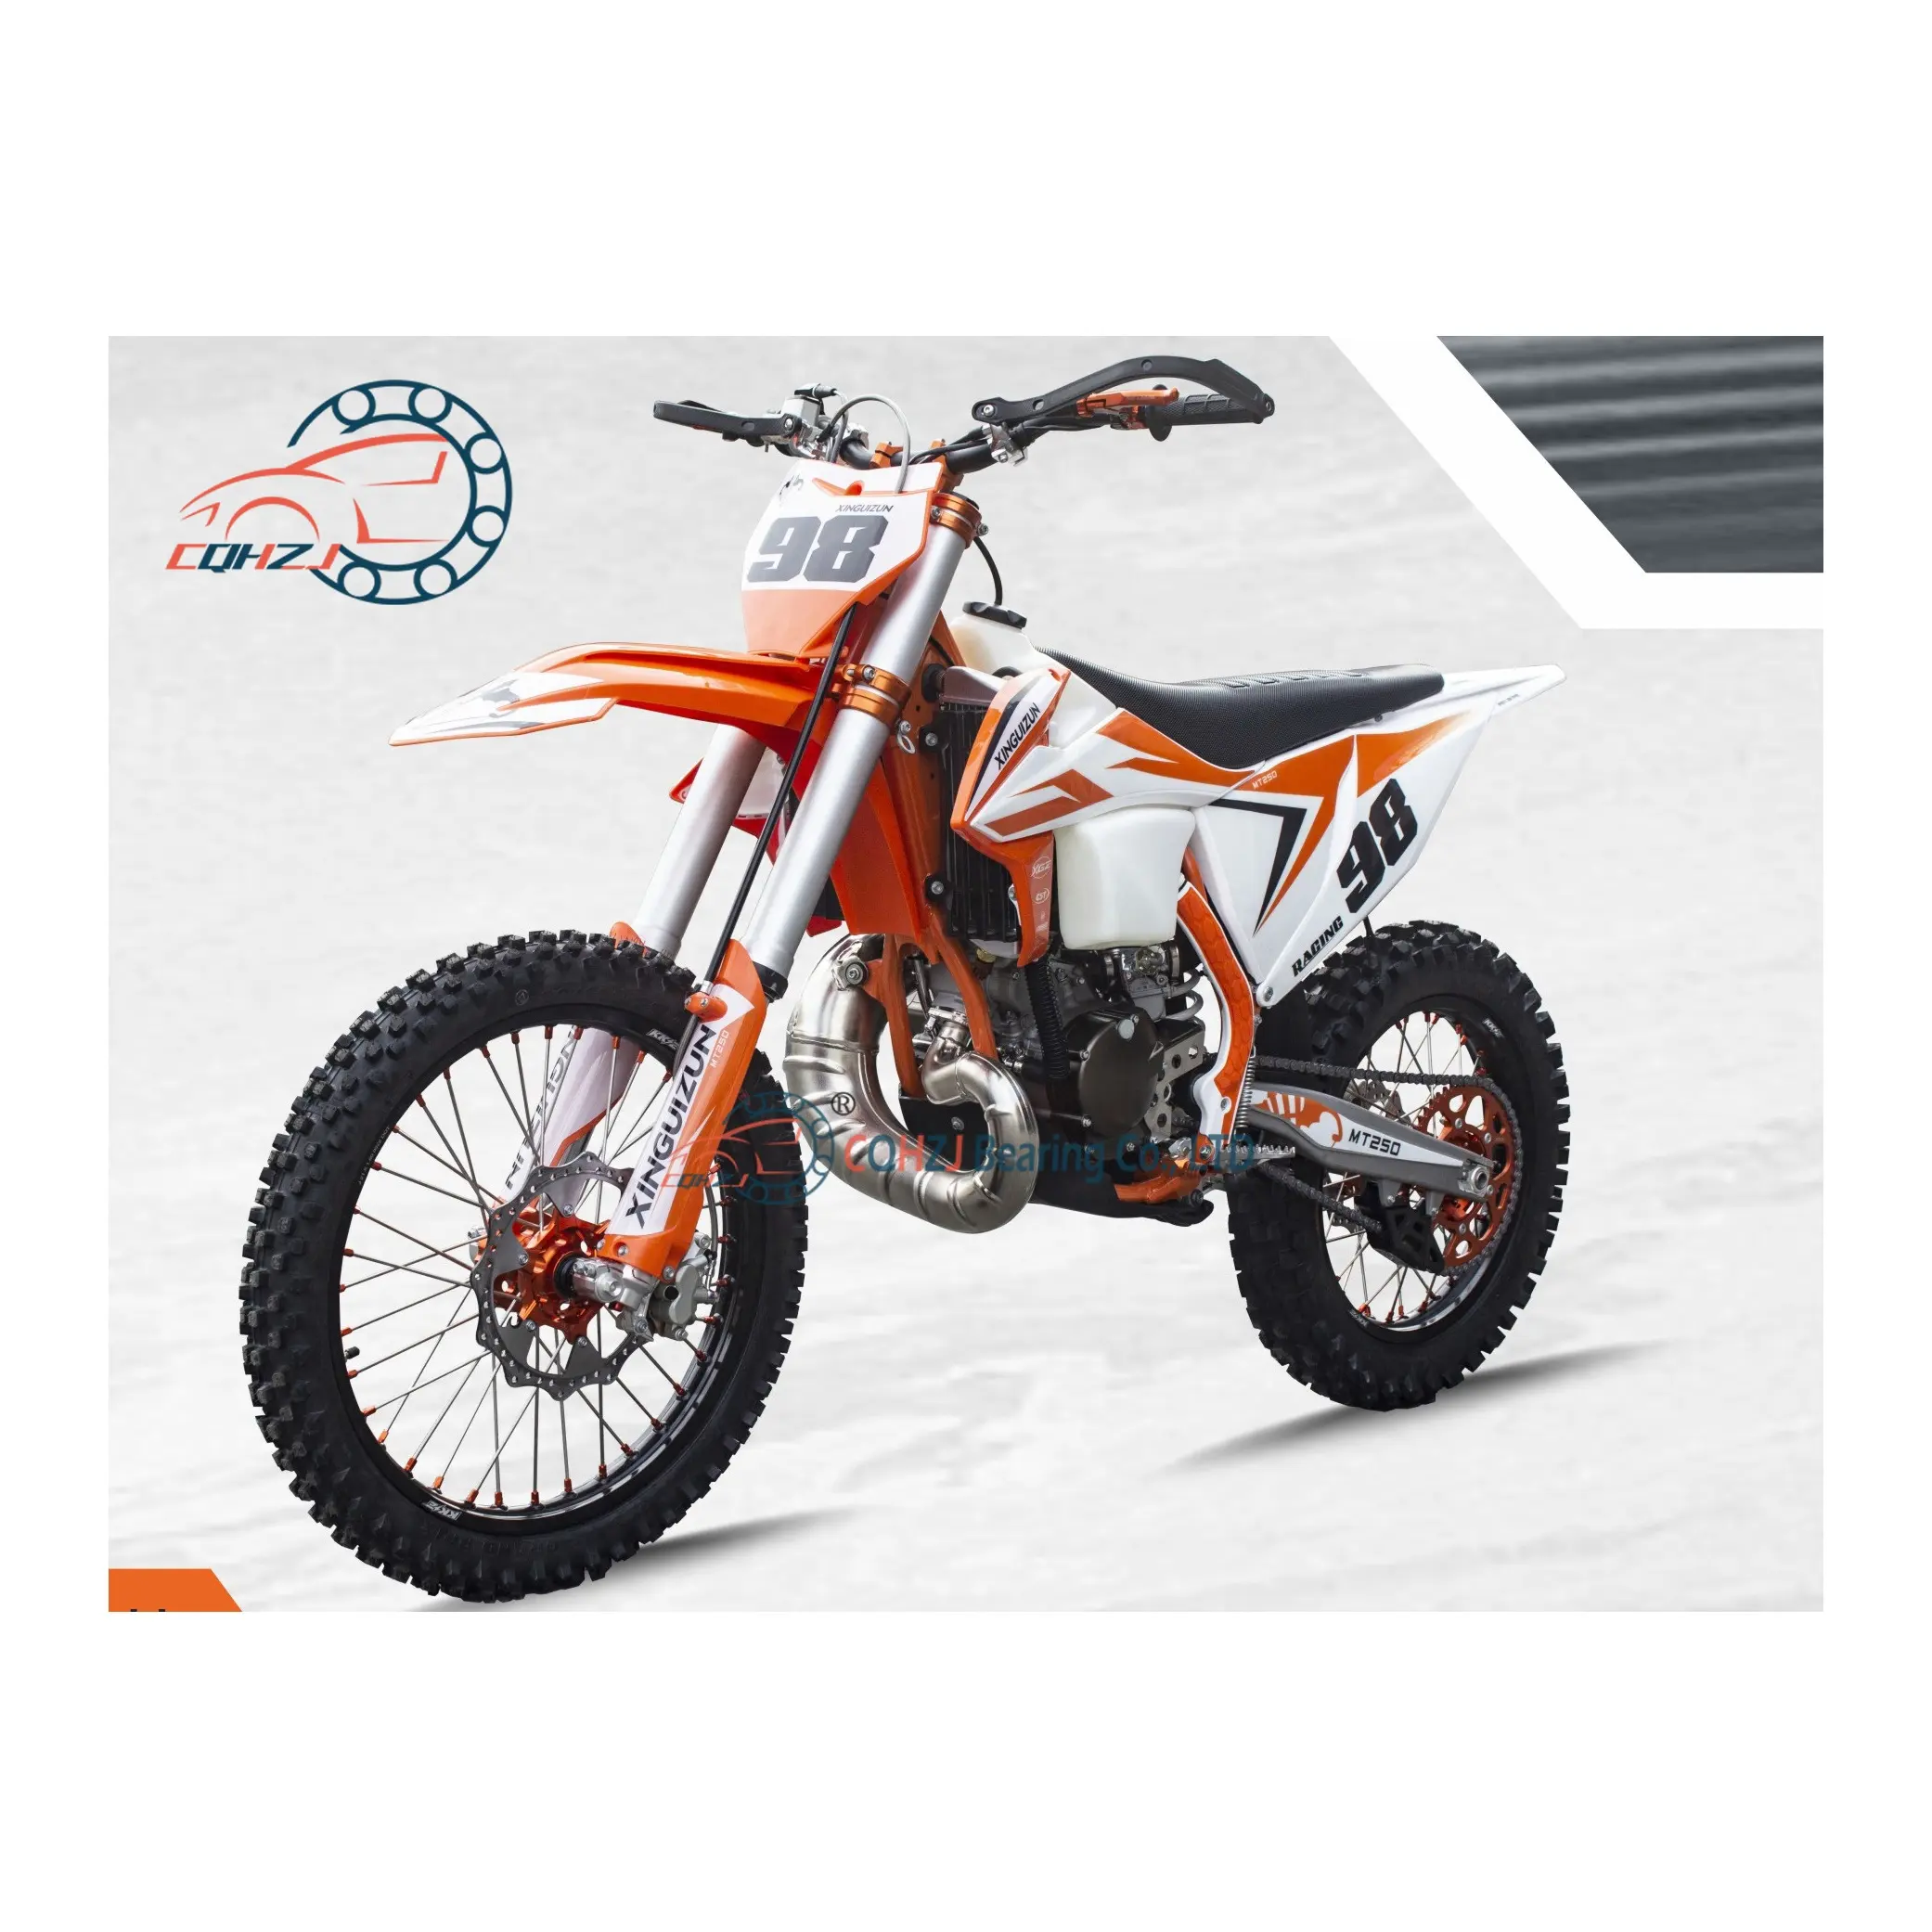 CQHZJ Wholesale Advanced Off-road Motorcycle Racing With Longxin MT250 Engine Single Cylinder Vertical Two-stroke MT250